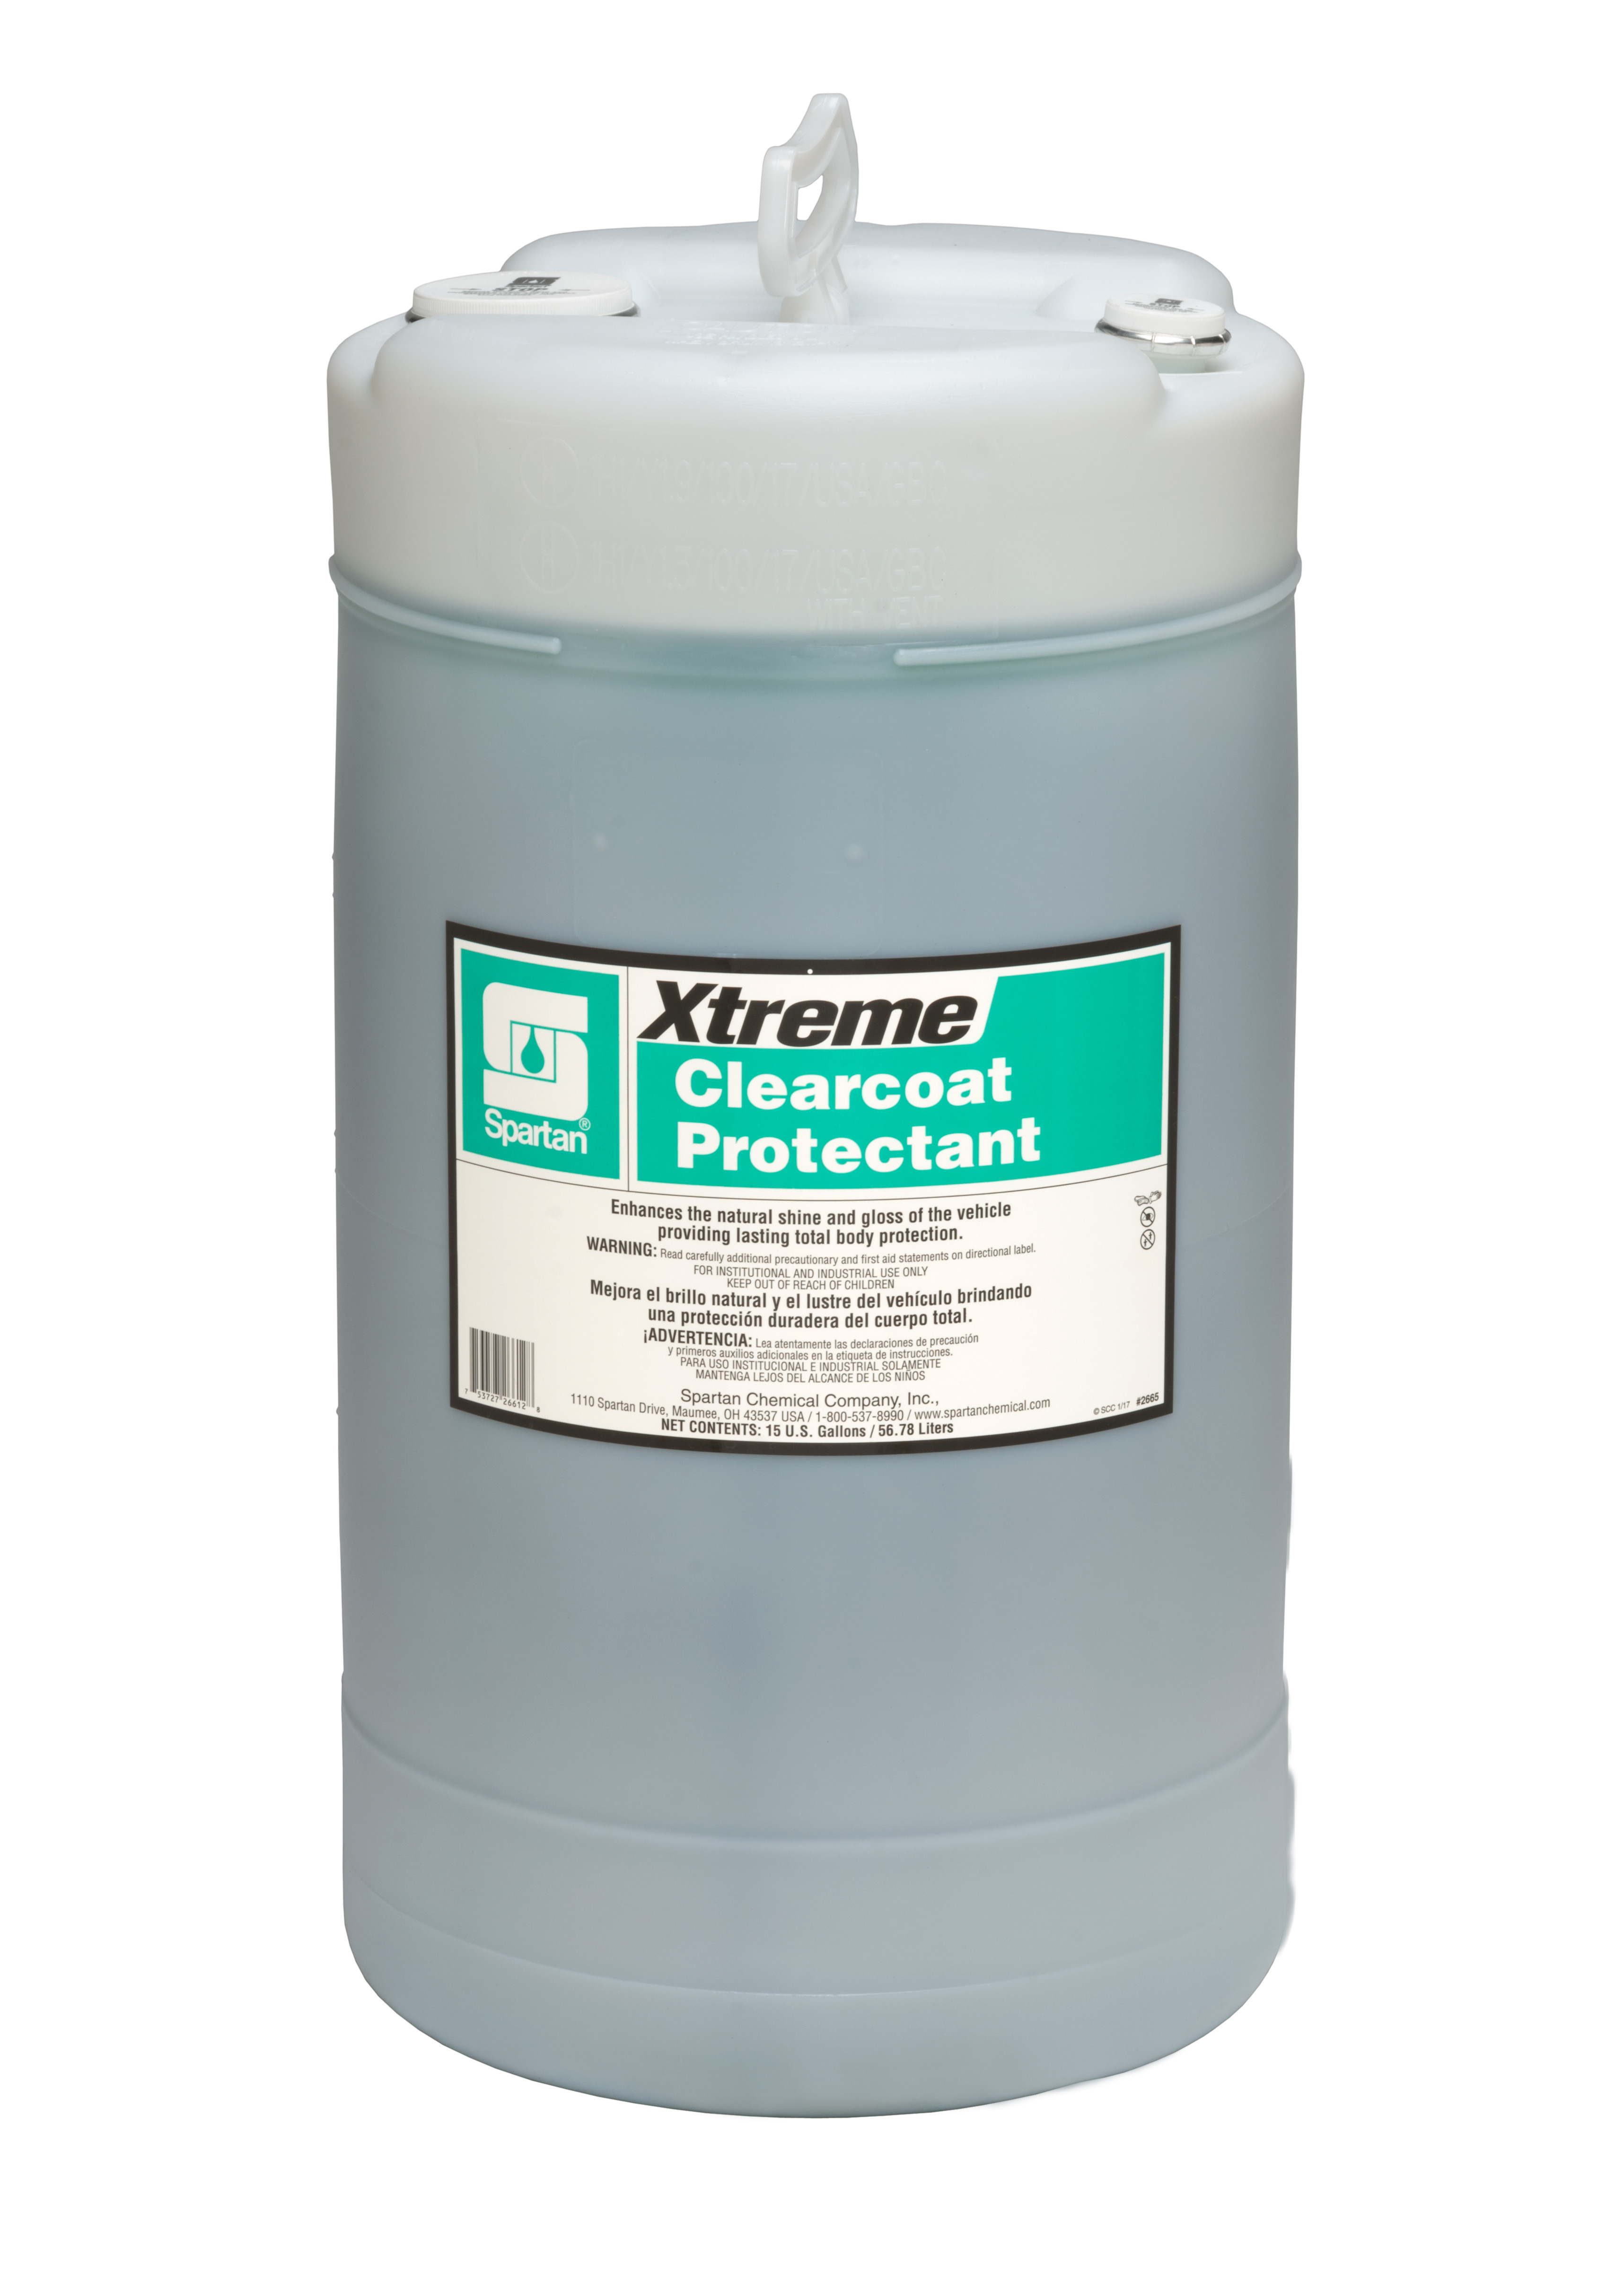 Spartan Chemical Company Xtreme Clearcoat Protectant, 15 GAL DRUM